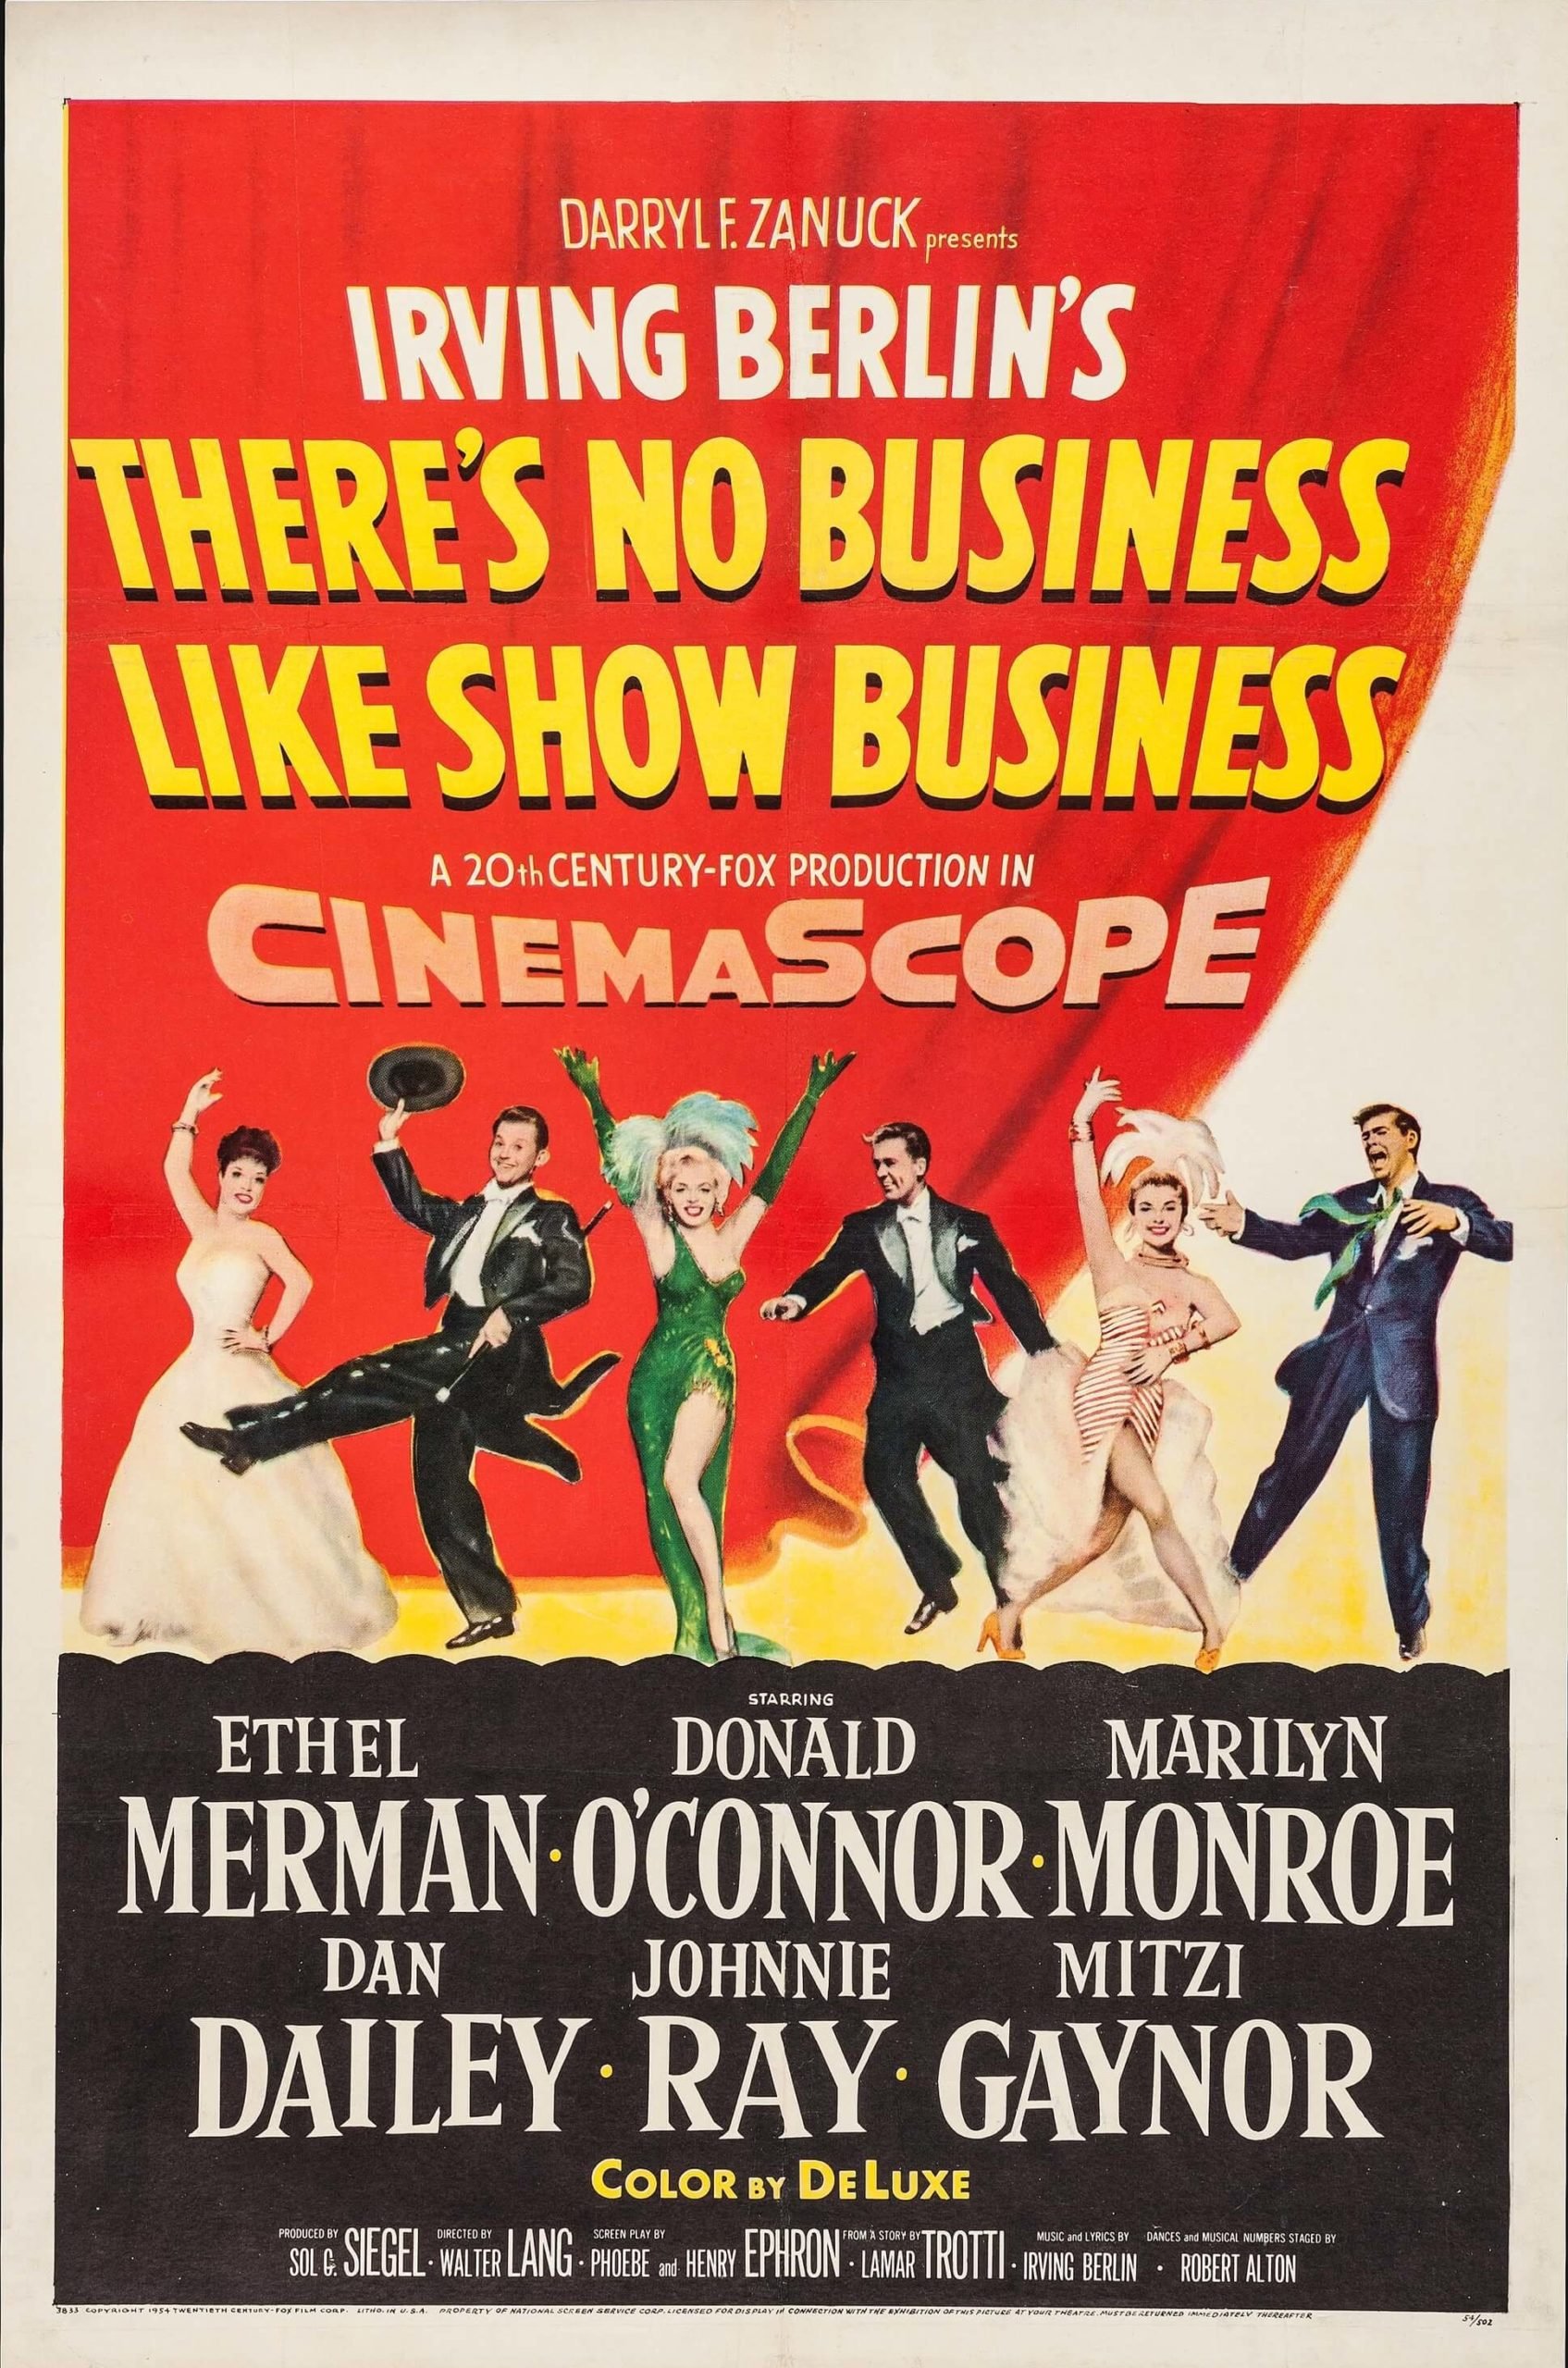 There's No Business Like Show Business - Limelight Movie Art